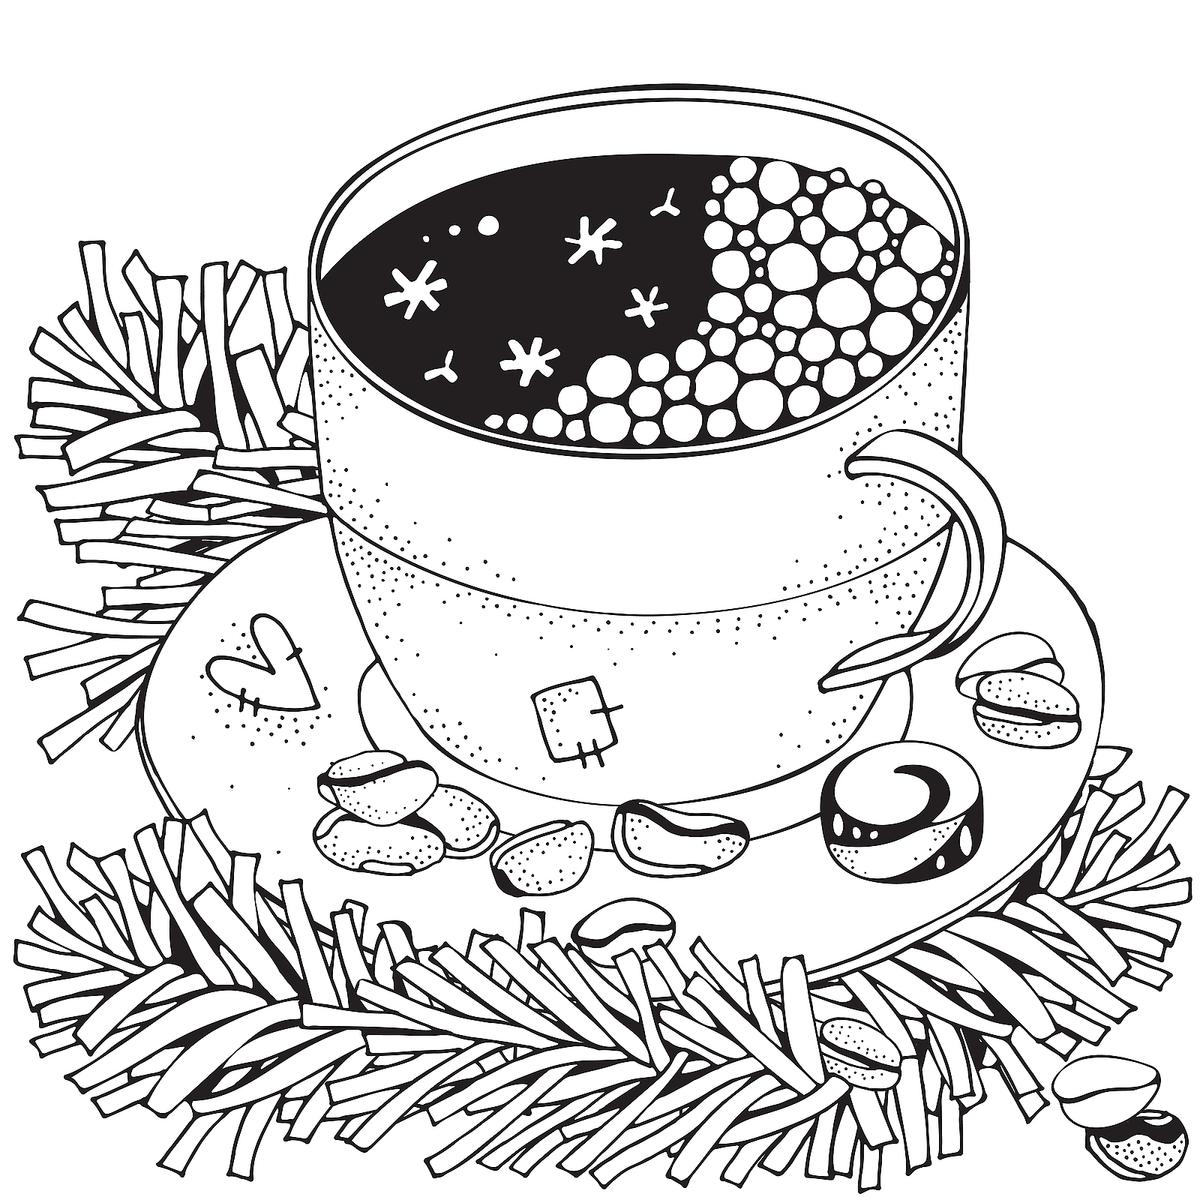 Winter Coloring Pages – coloring.rocks!